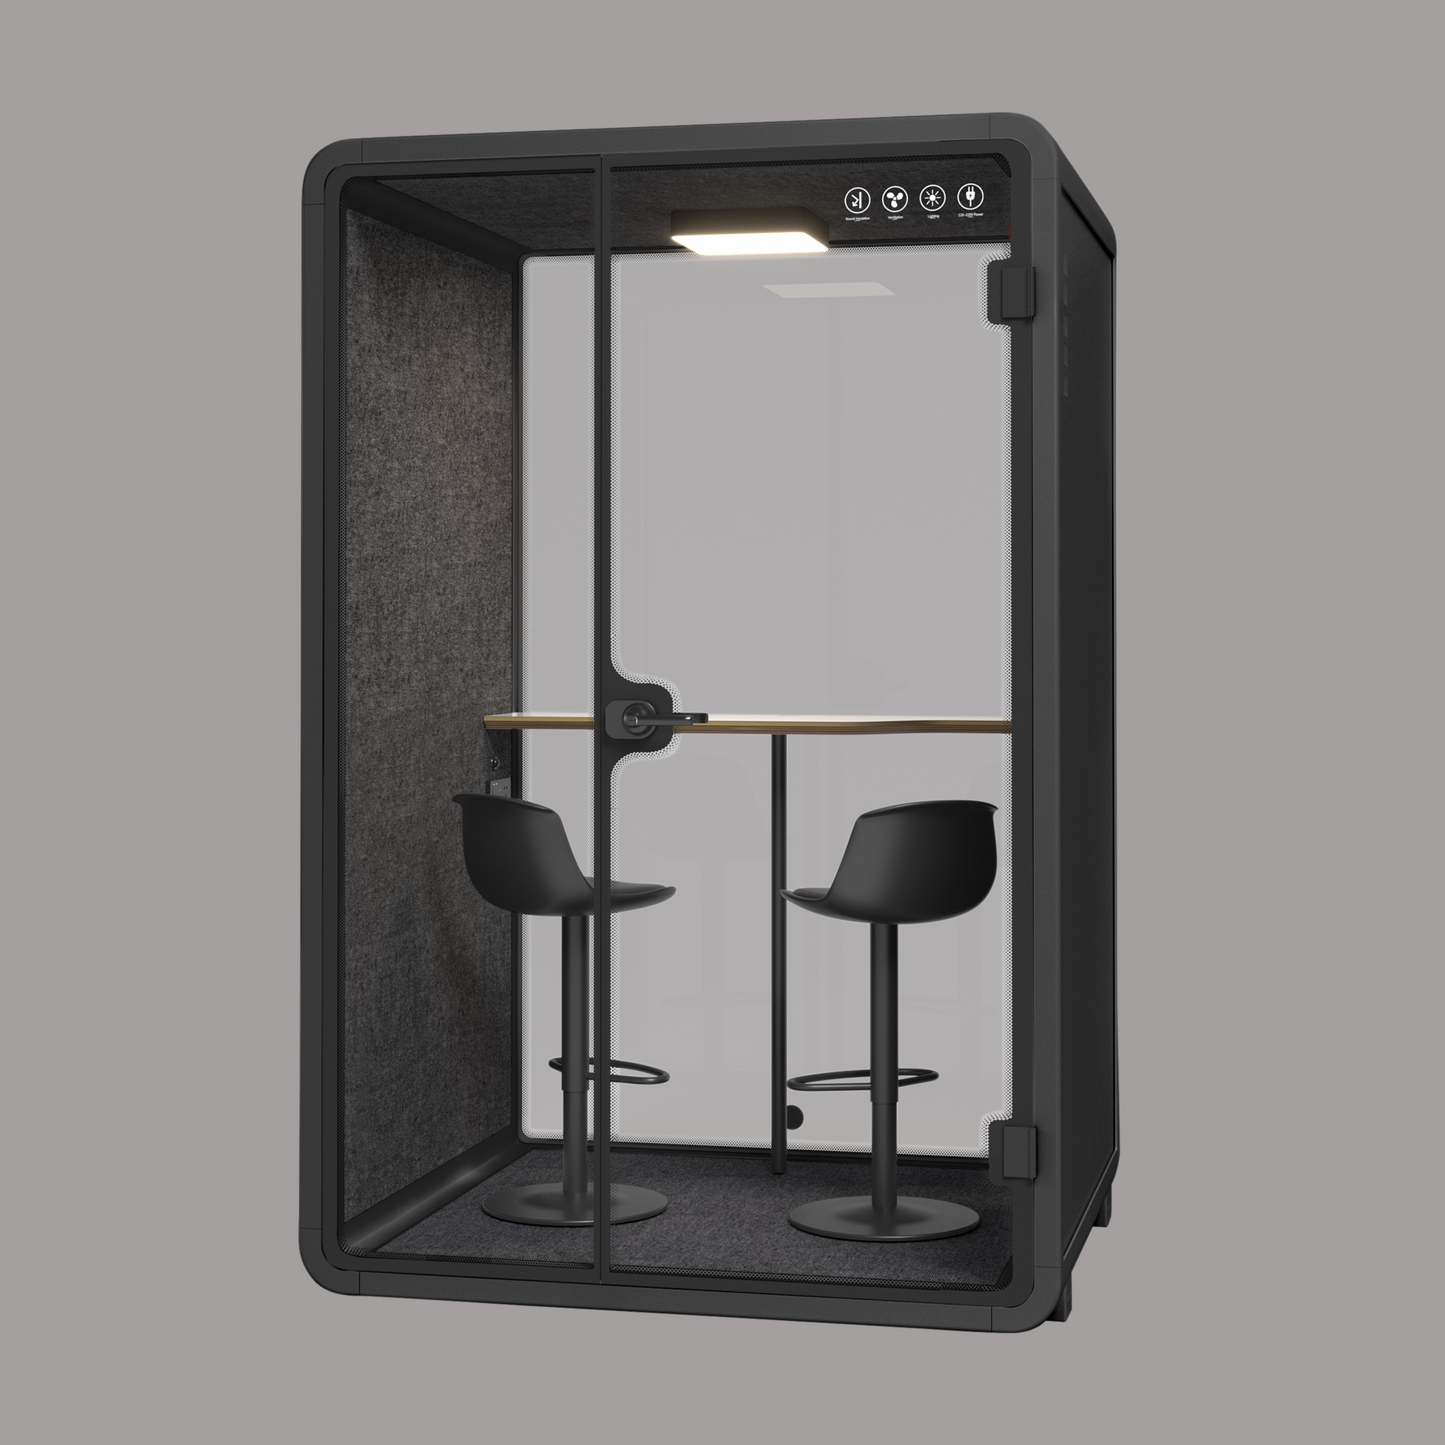 Black Office Phone Booth